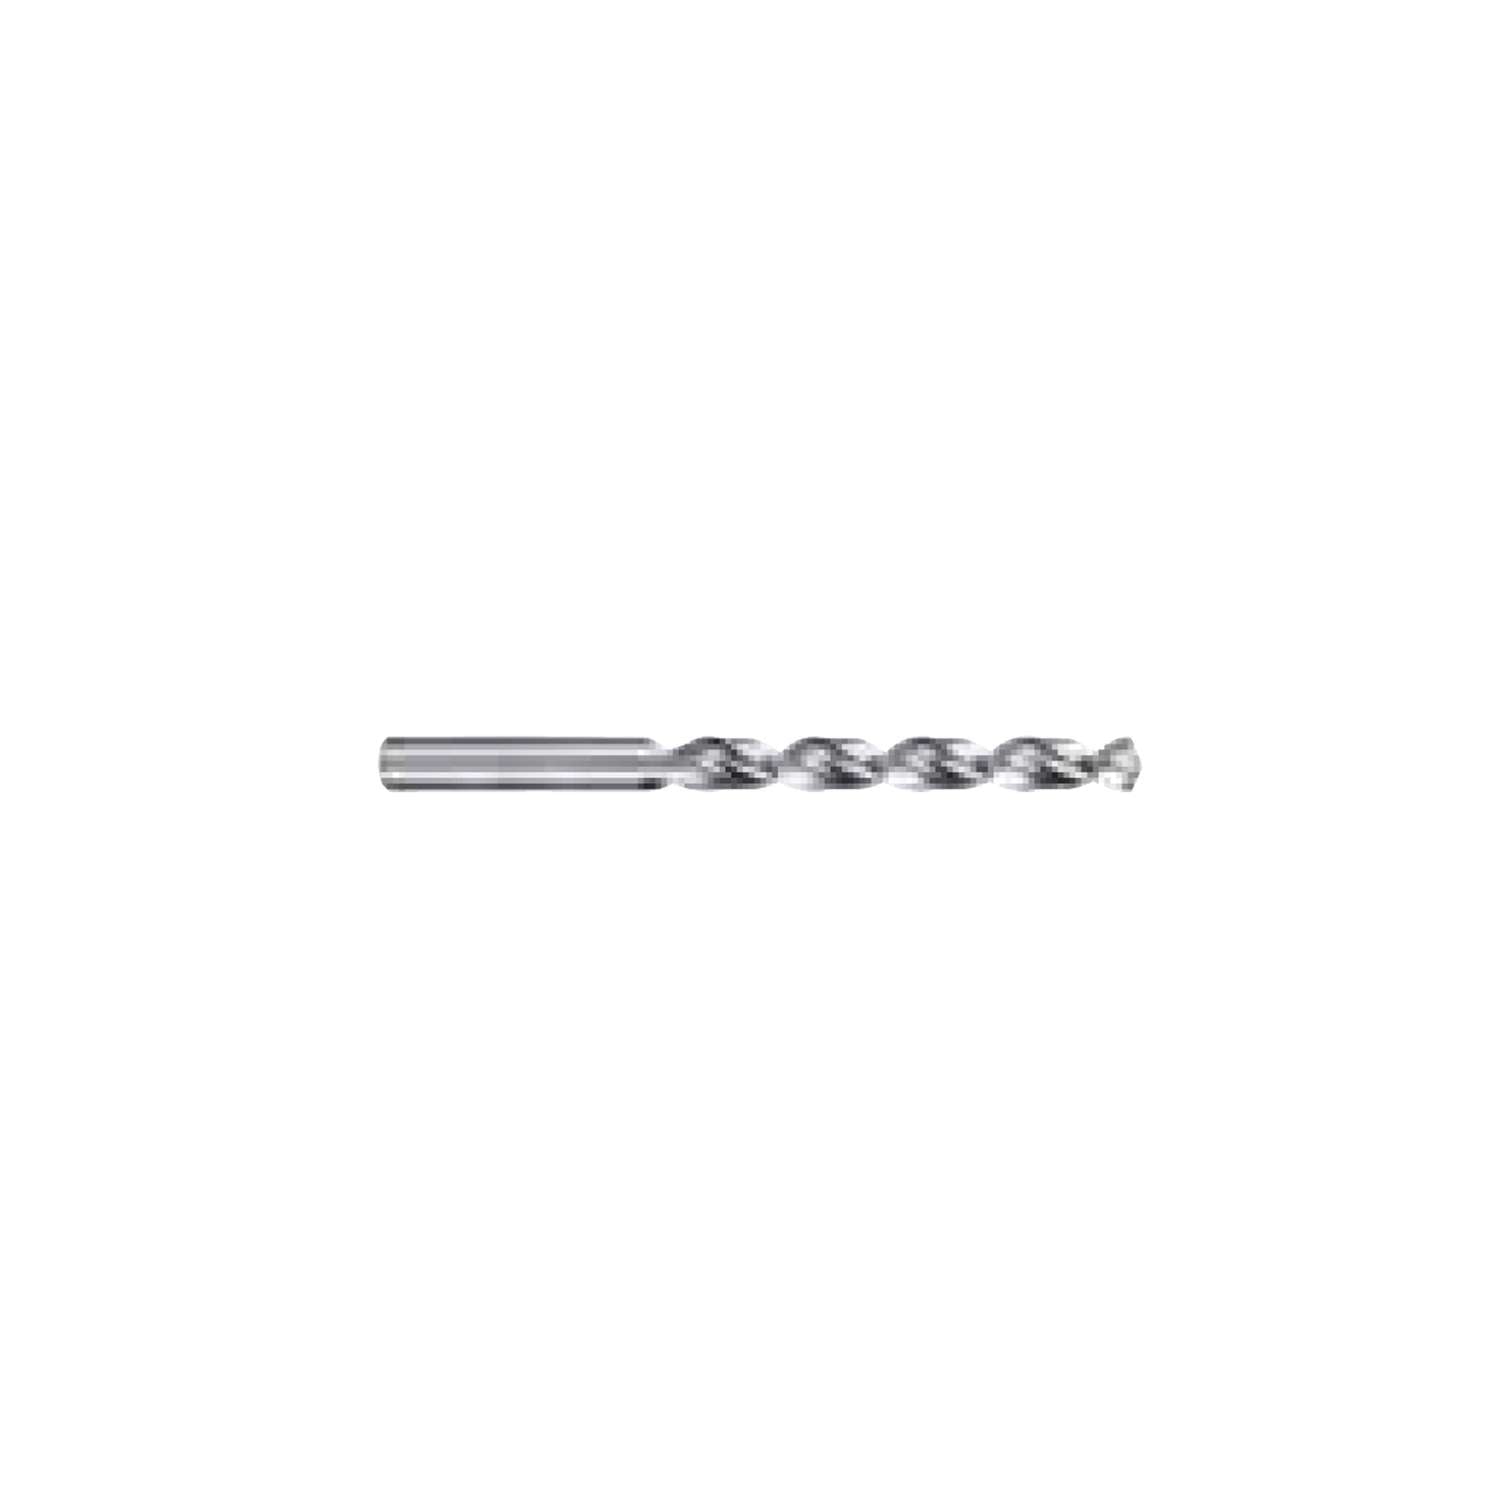 Specific cylindrical drill for aluminium DIN 338 type W  (3,7-6,25) - ILIX